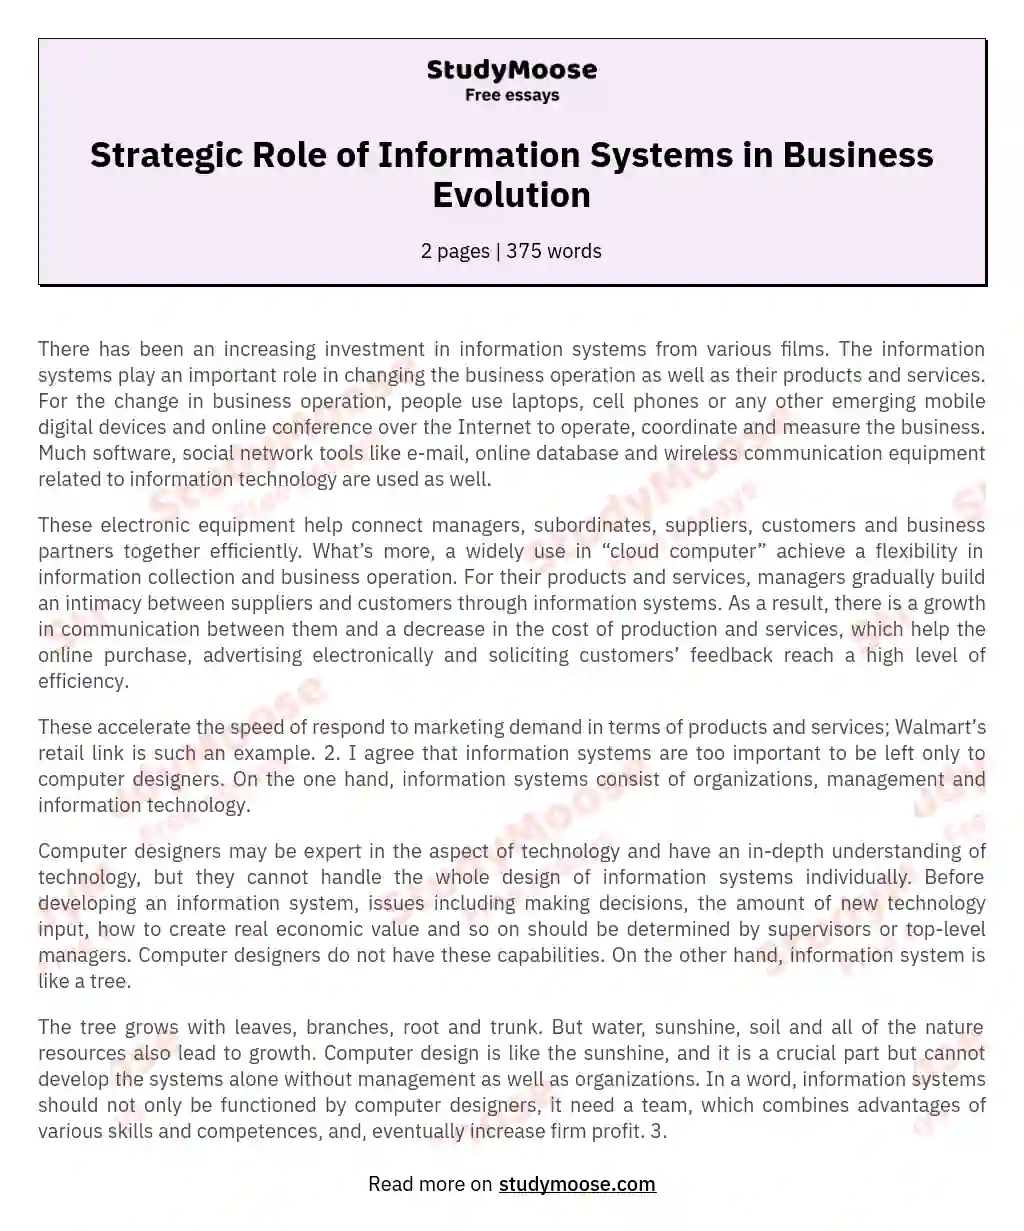 Strategic Role of Information Systems in Business Evolution essay